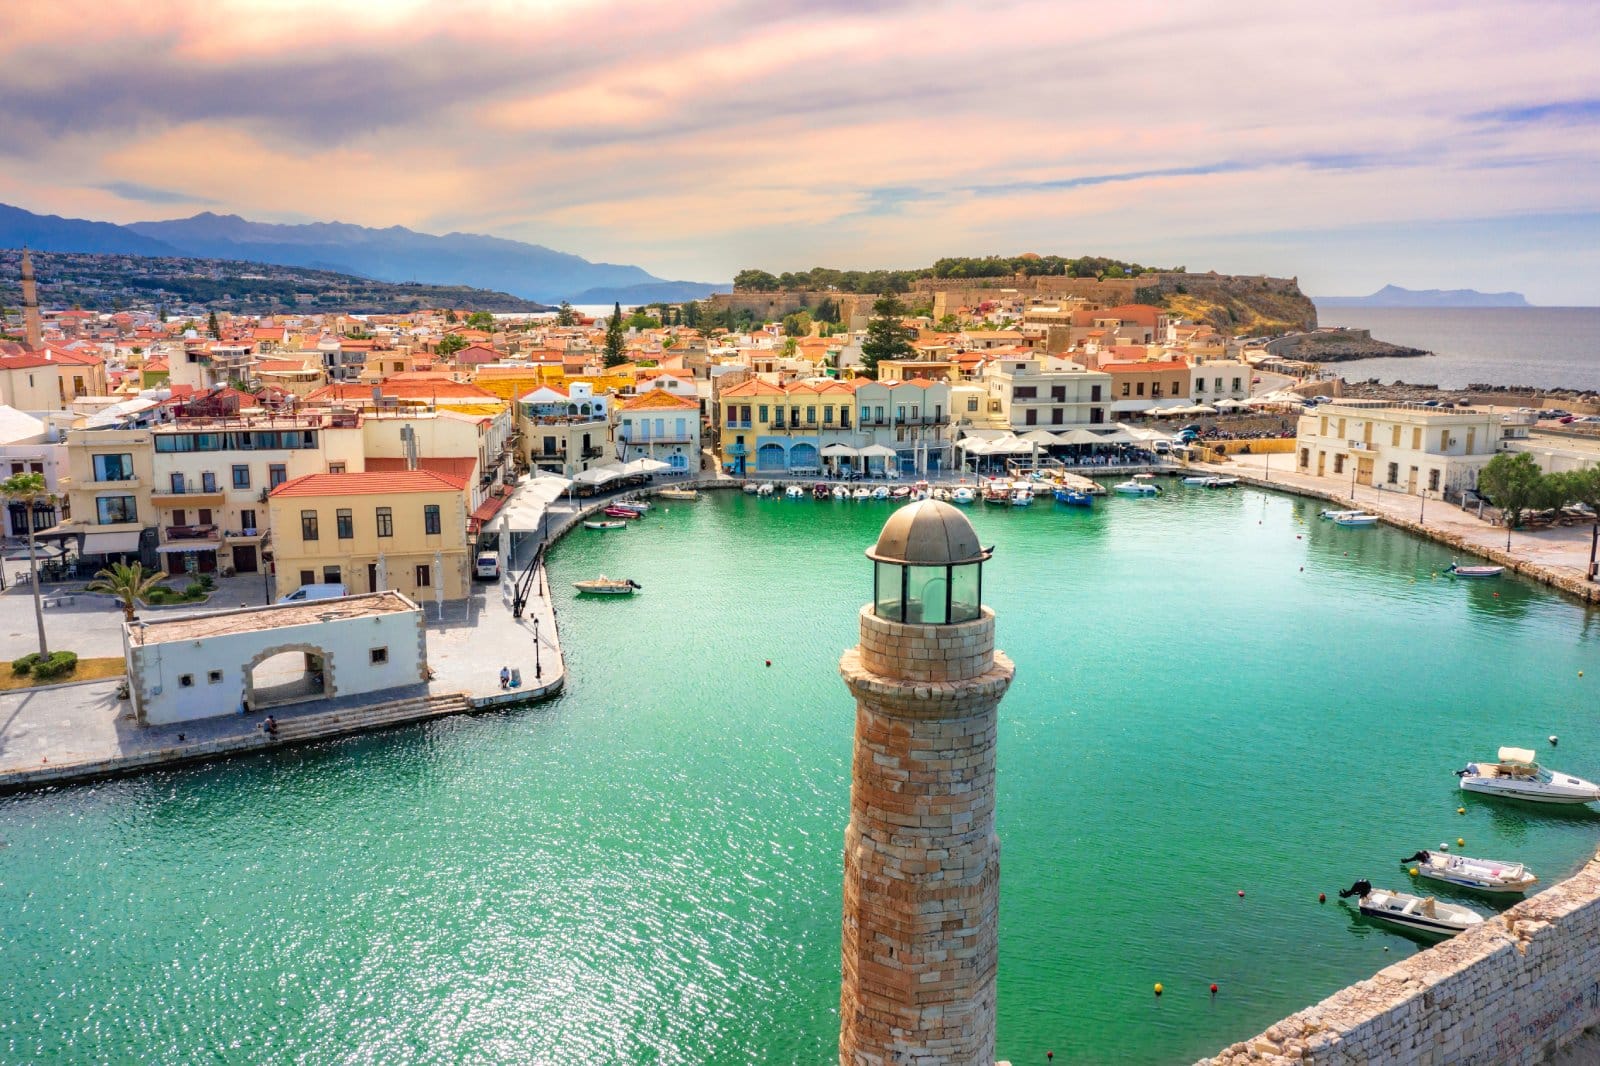 <p class="wp-caption-text">Image Credit: Shutterstock / Georgios Tsichlis</p>  <p><span>With its diverse landscapes and rich history, Crete offers a comprehensive glimpse into the essence of Greek culture and natural beauty. The island’s rugged mountains give way to pristine beaches, such as Elafonissi’s pink sand and Balos Lagoon, where turquoise waters meet white sands. The archaeological site of Knossos, the largest Bronze Age archaeological site on Crete, provides insight into the sophisticated Minoan civilization. Crete’s culinary tradition, rooted in the Mediterranean diet, emphasizes fresh, local ingredients and is best experienced in the island’s tavernas, where traditional dishes like moussaka and dakos are served. The Samaria Gorge, a World Biosphere Reserve, offers challenging hikes through one of Europe’s longest canyons, leading to the remote and beautiful Agia Roumeli. Crete is a destination encapsulating Greece’s beauty, history, and culinary richness.</span></p>